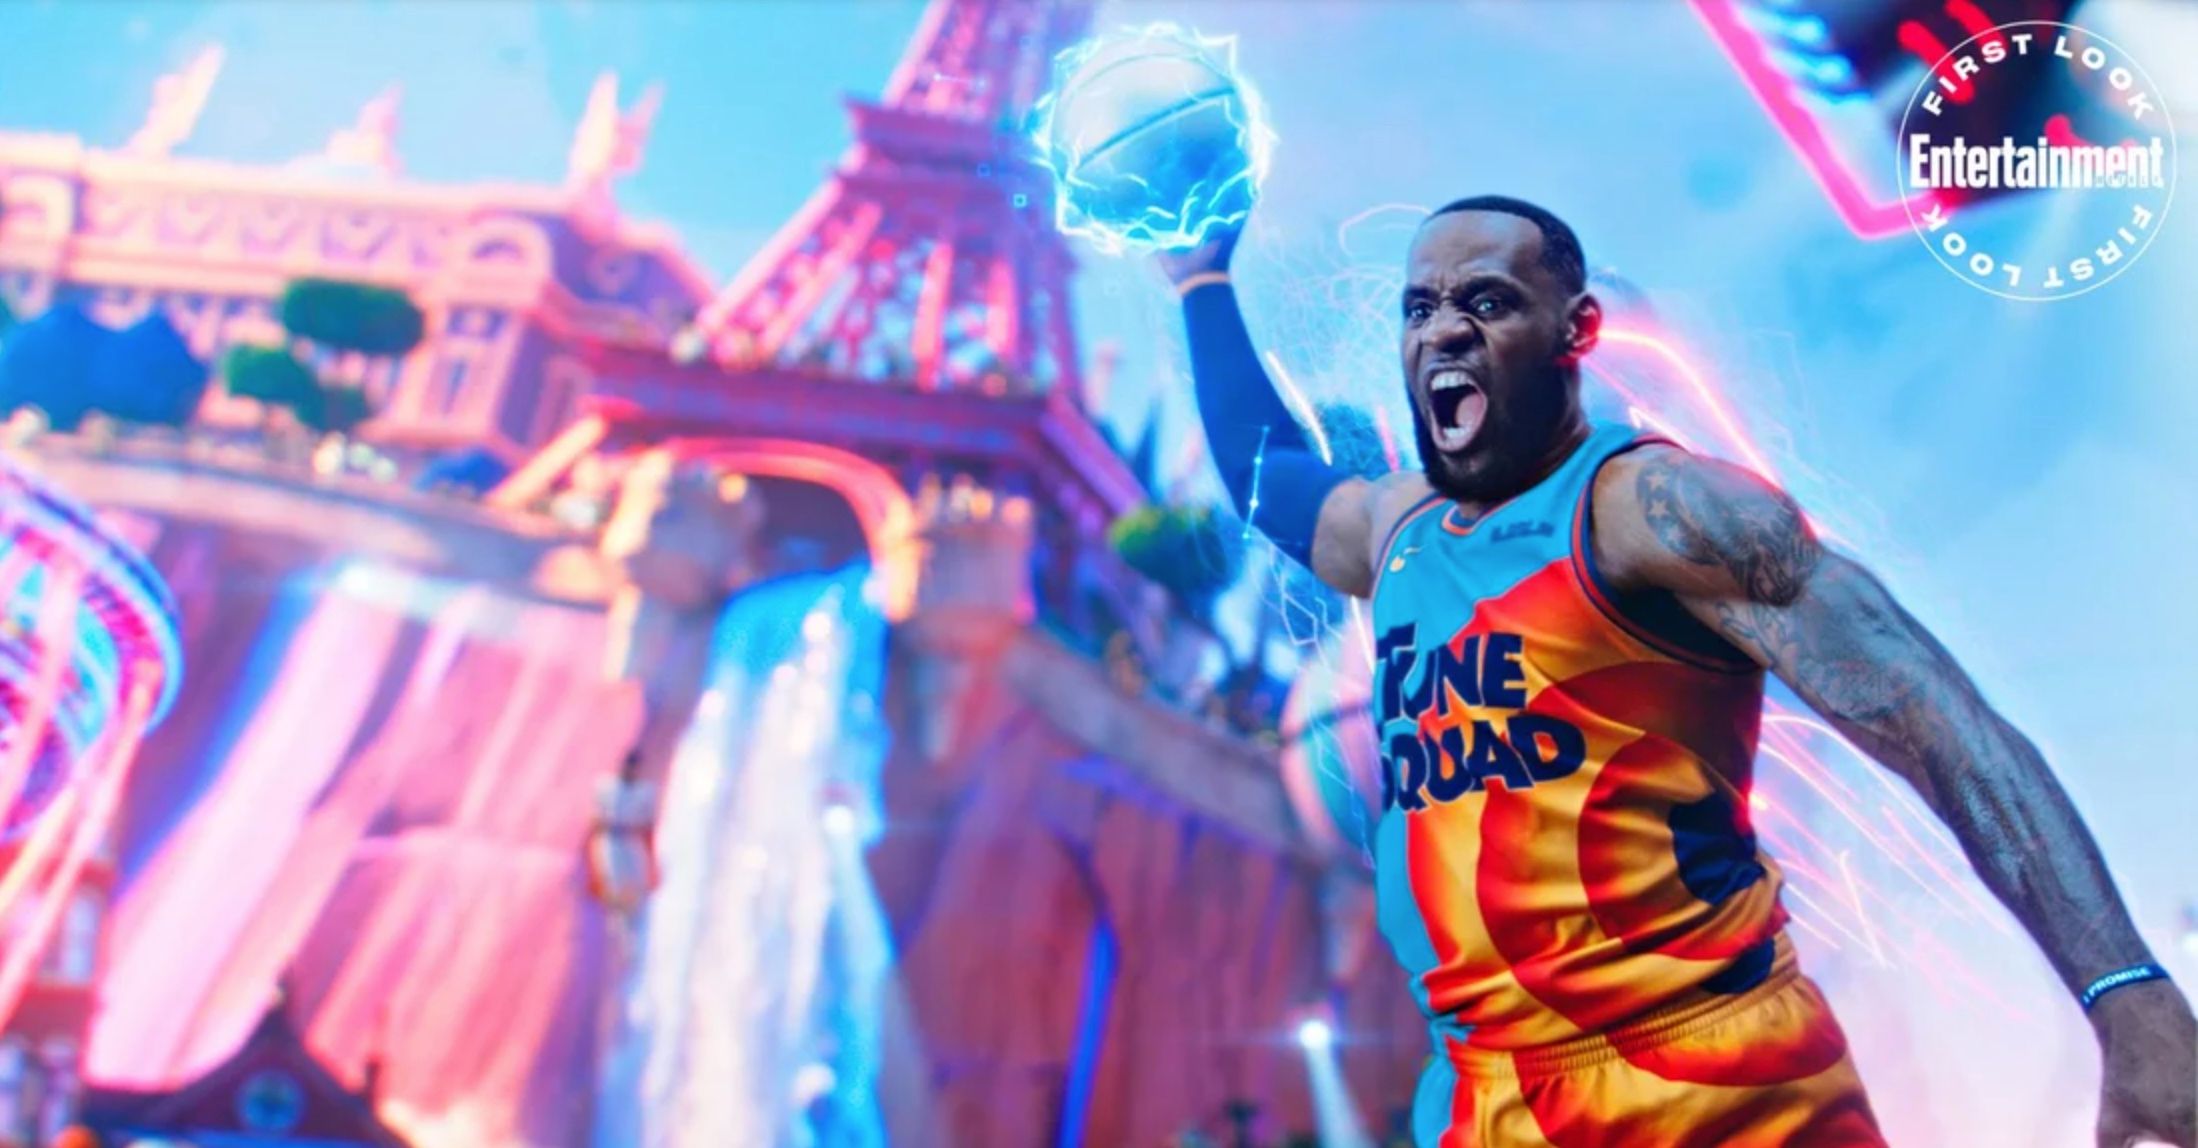 Space Jam 2 Story Details LeBron James Must Save His Son From A Virtual Reality